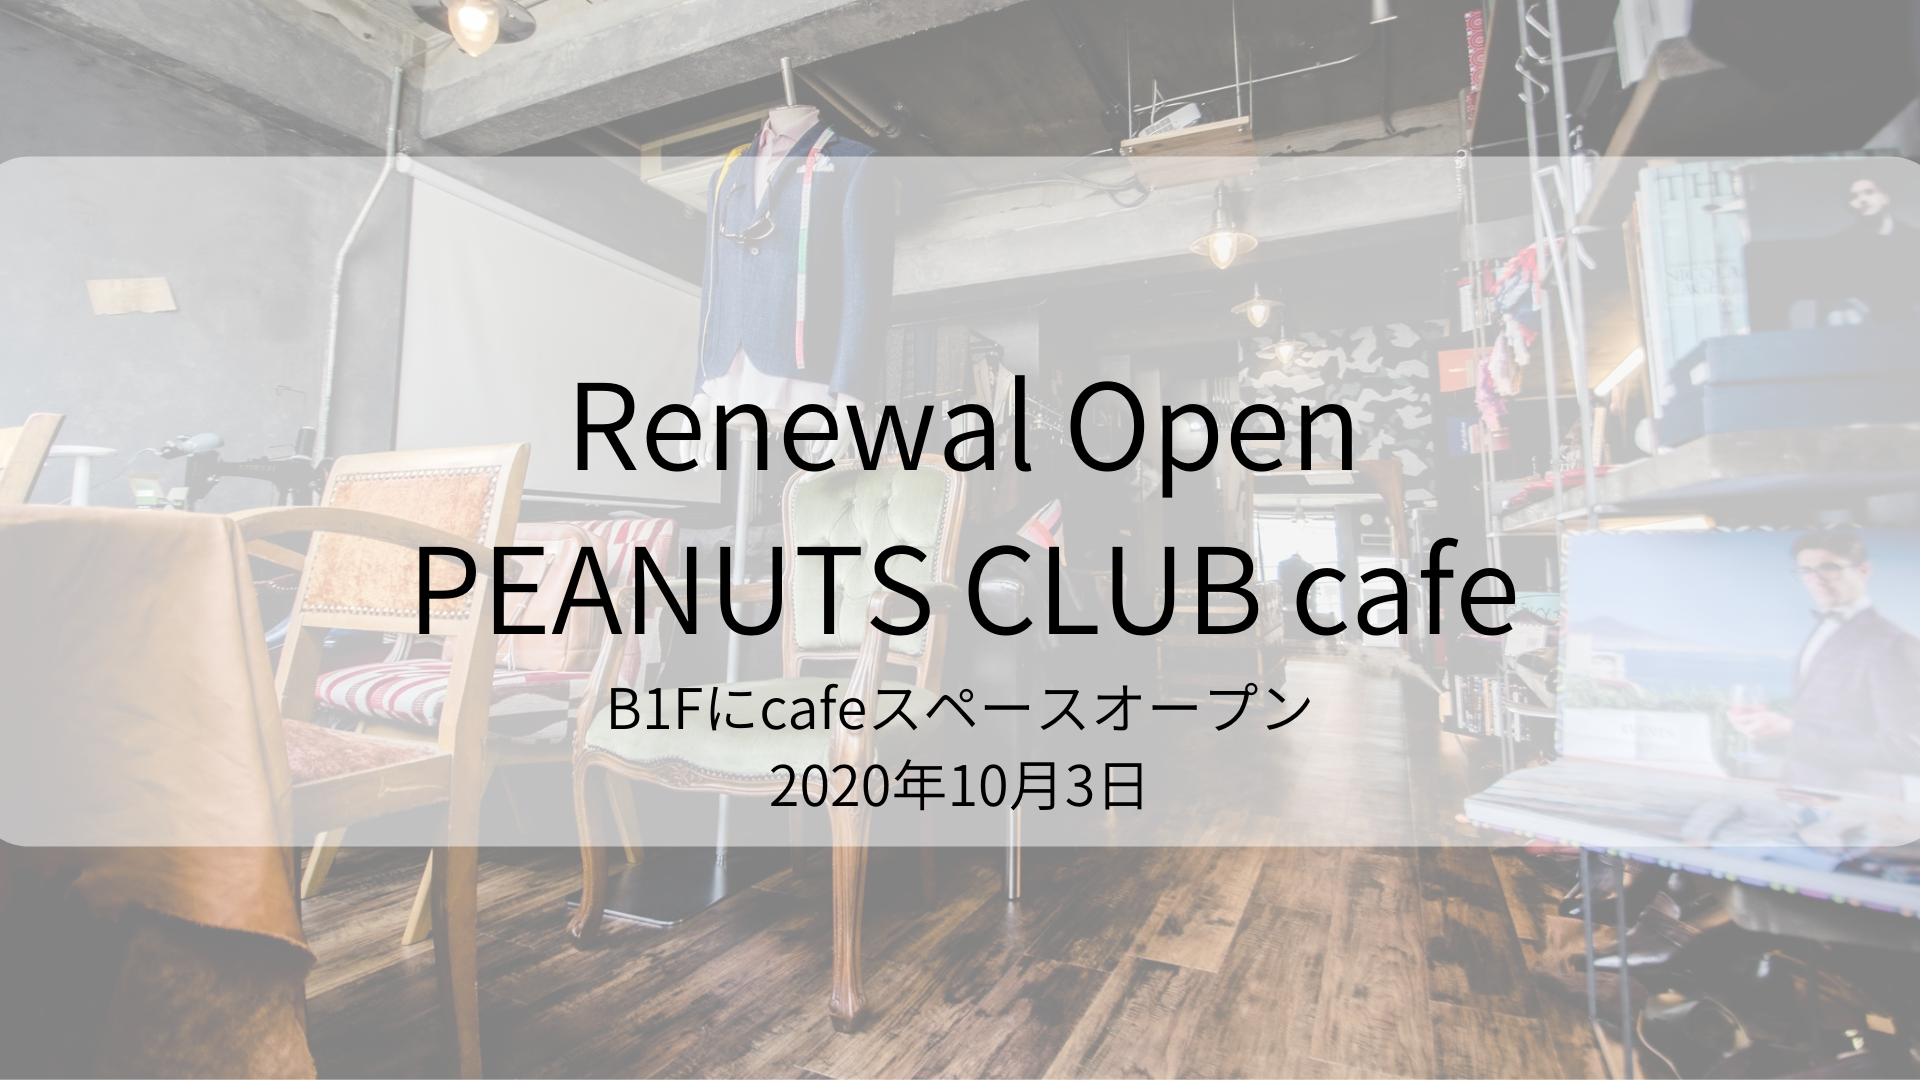 10/3 LUSSO cafe Renewal Open Event